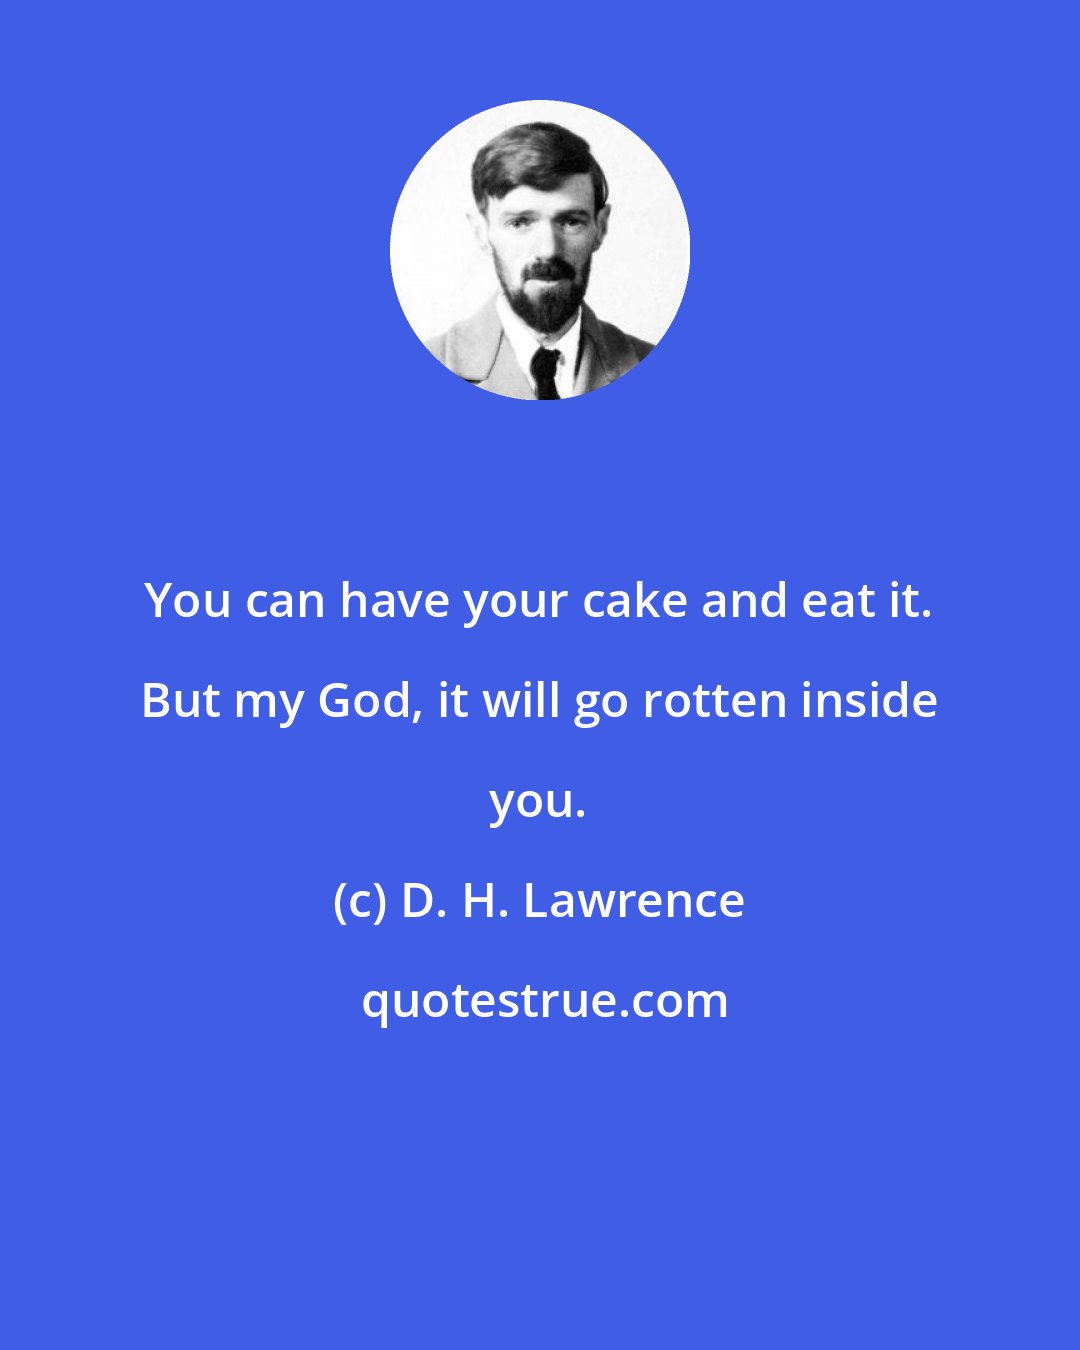 D. H. Lawrence: You can have your cake and eat it. But my God, it will go rotten inside you.